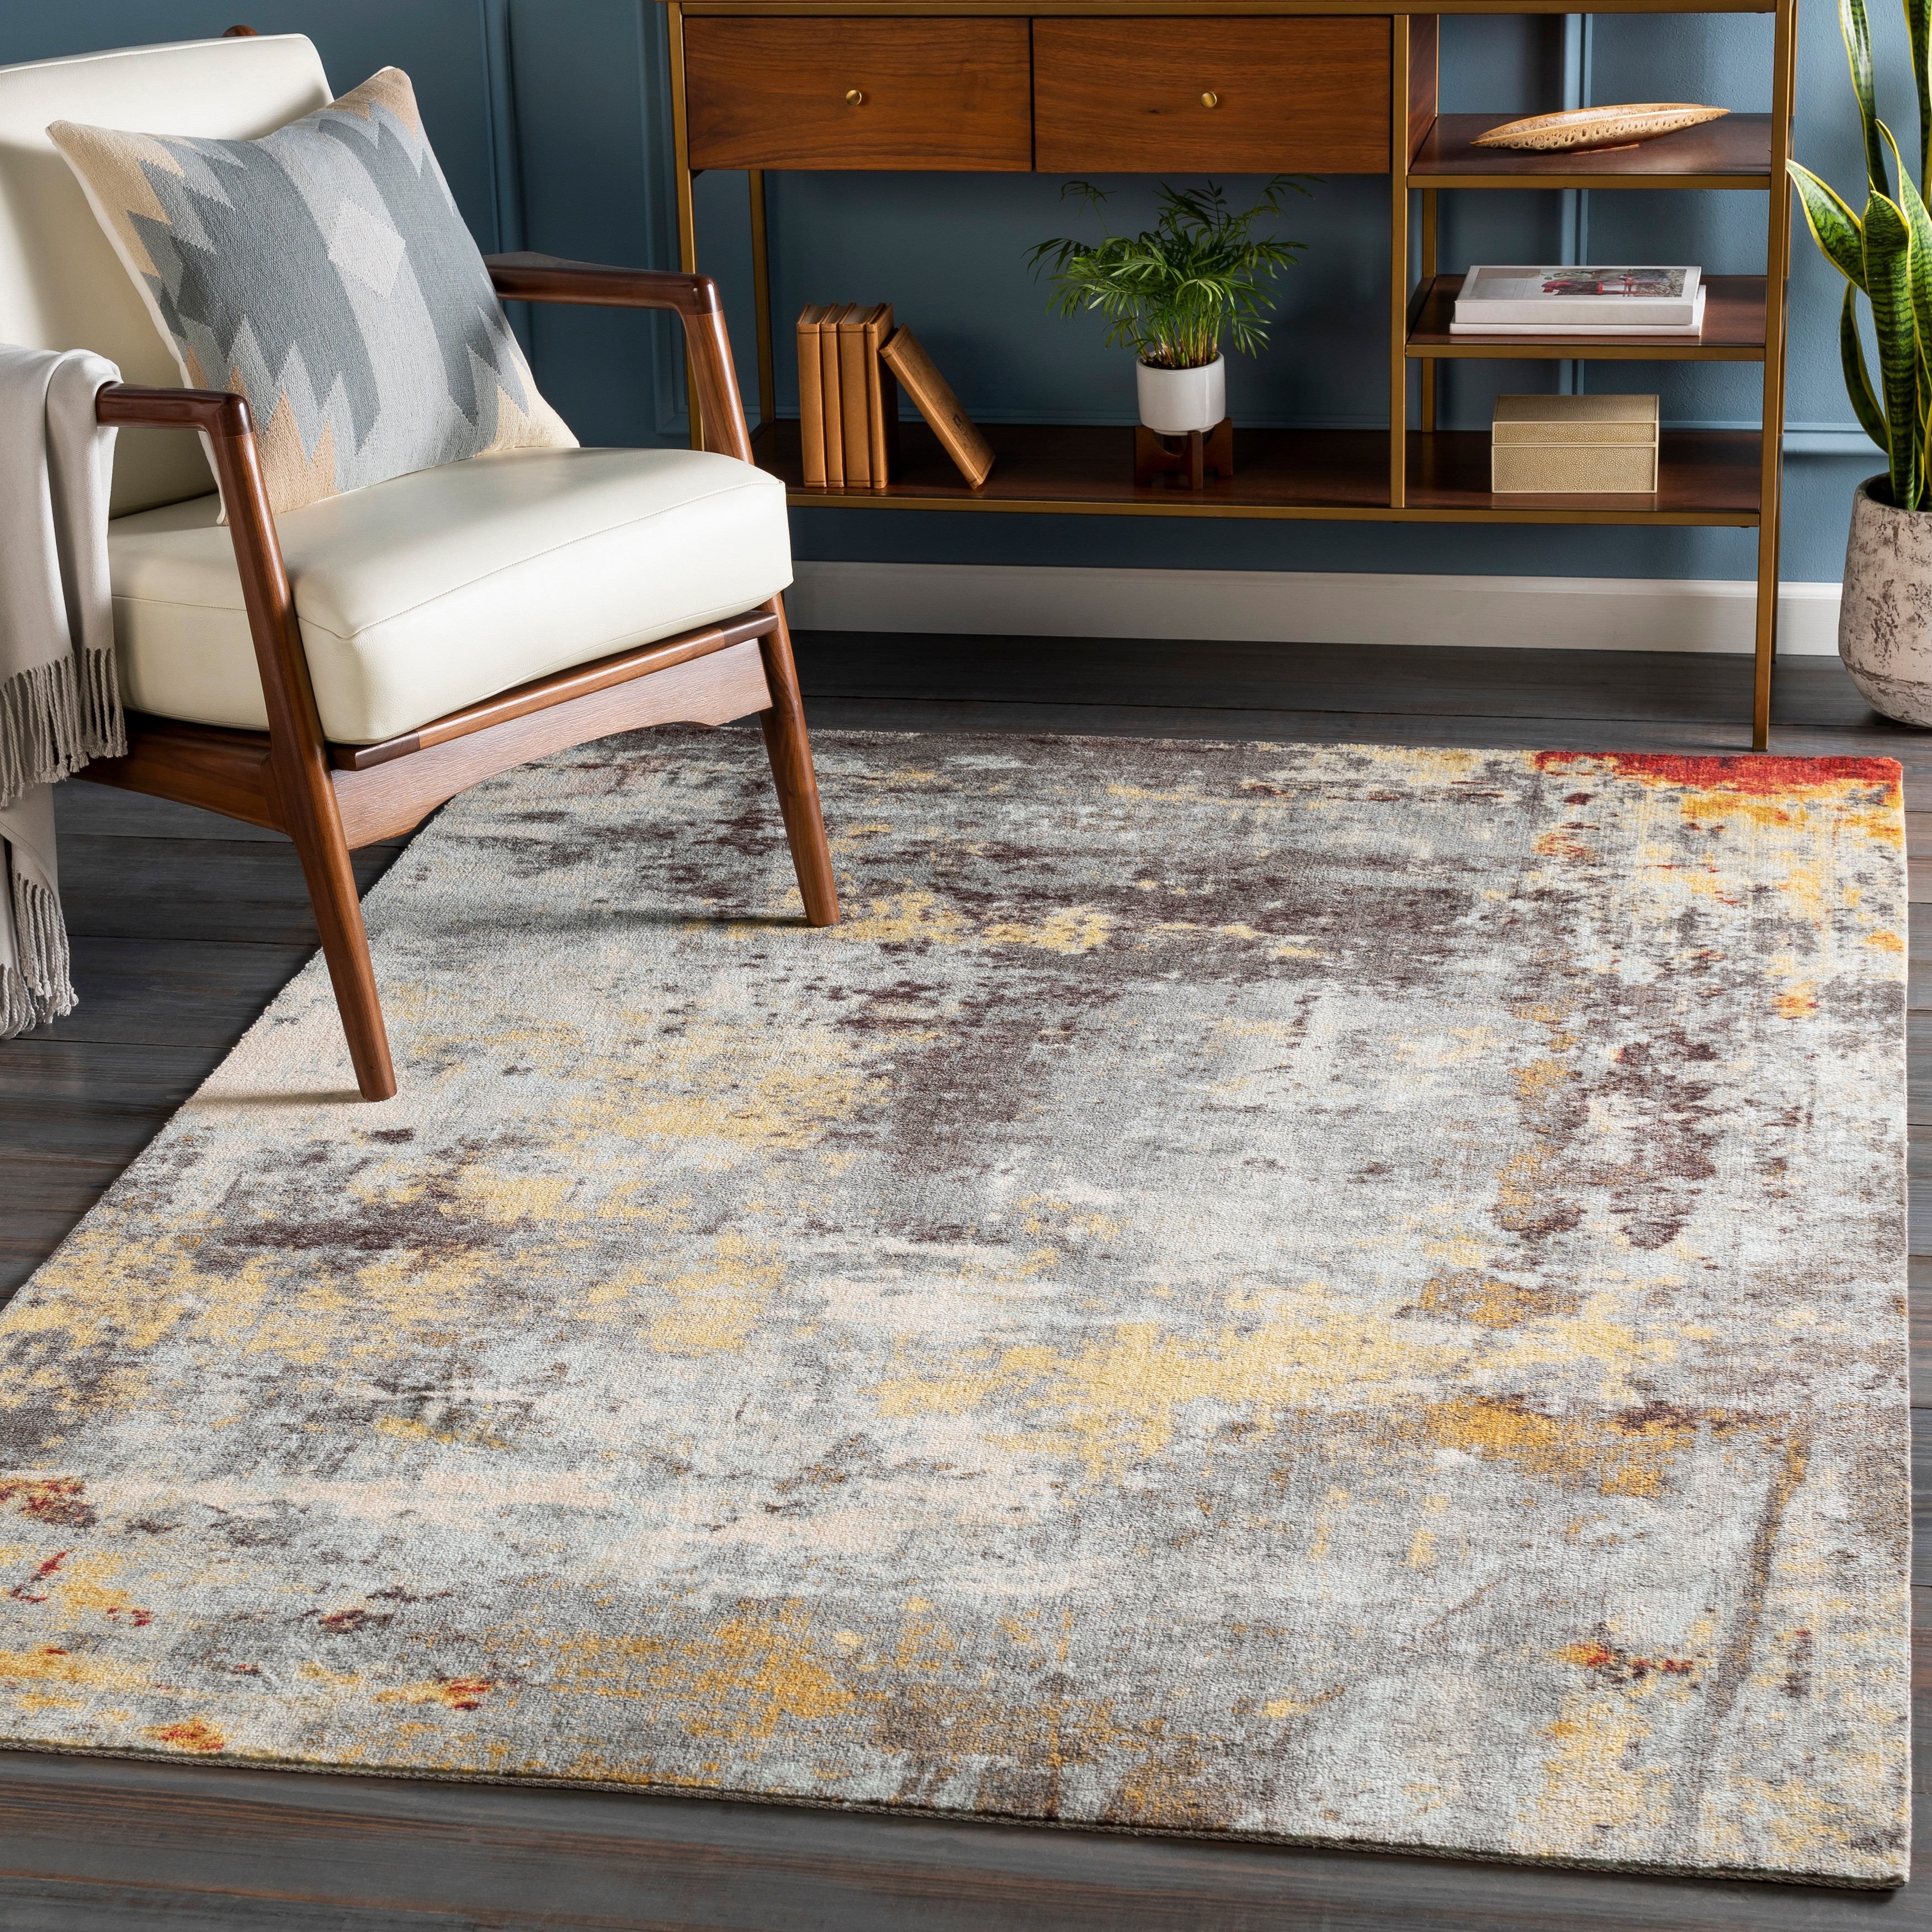 Industrial Style Distressed Concrete Area Rug. Indoor or Outdoor Rug 2x3 to  8x10 Rectangle. Round Rug and Hallway or Patio Runner 